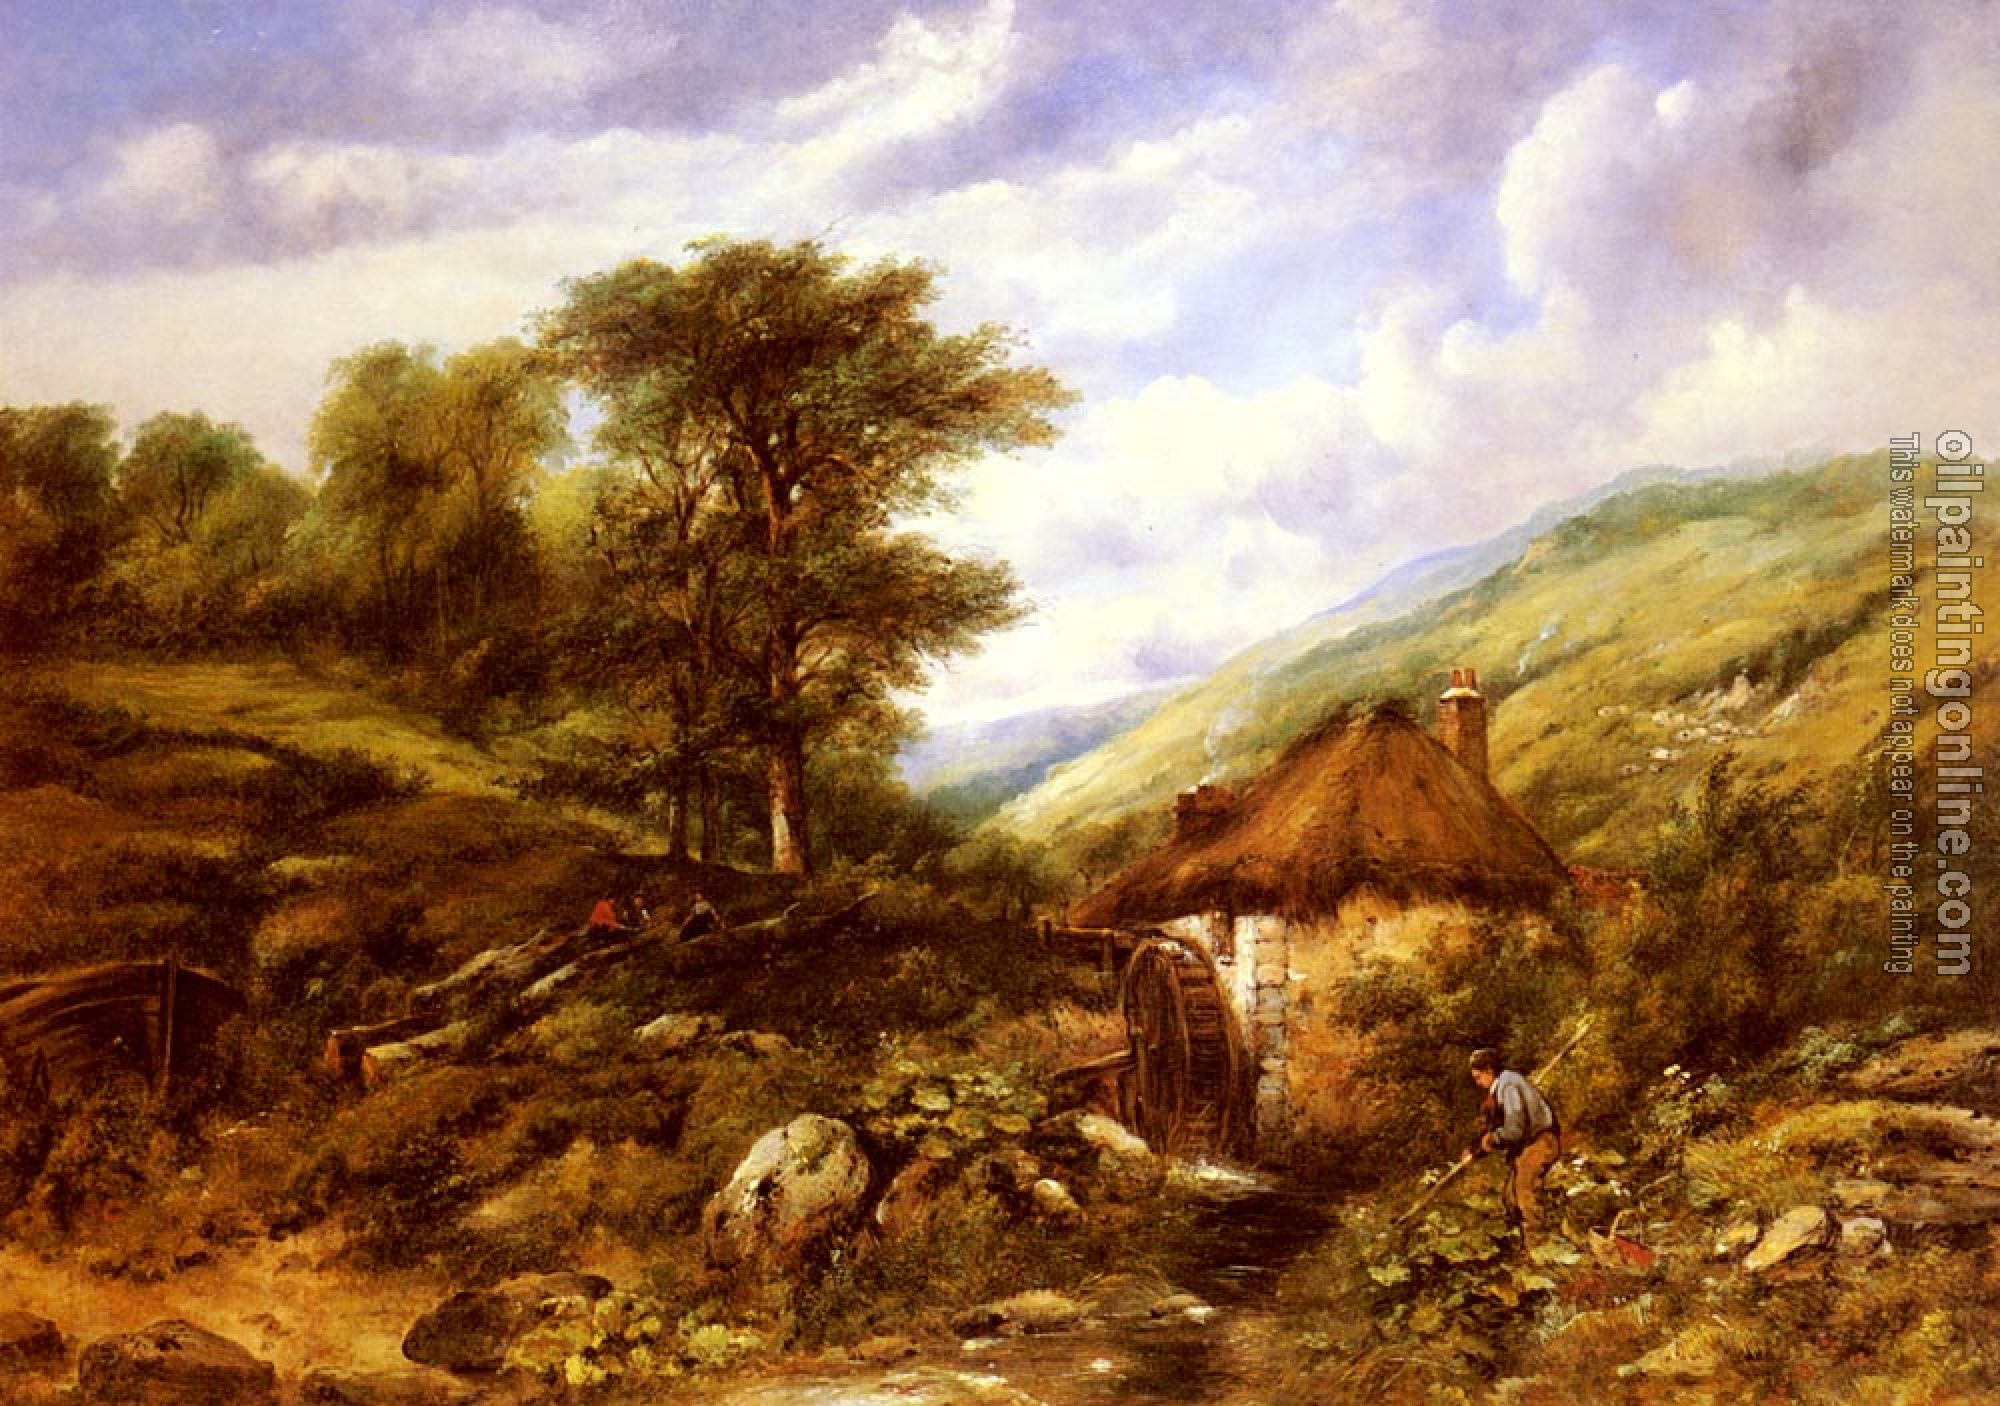 Watts, Frederick Waters - An Overshot Mill In A Wooded Valleyer